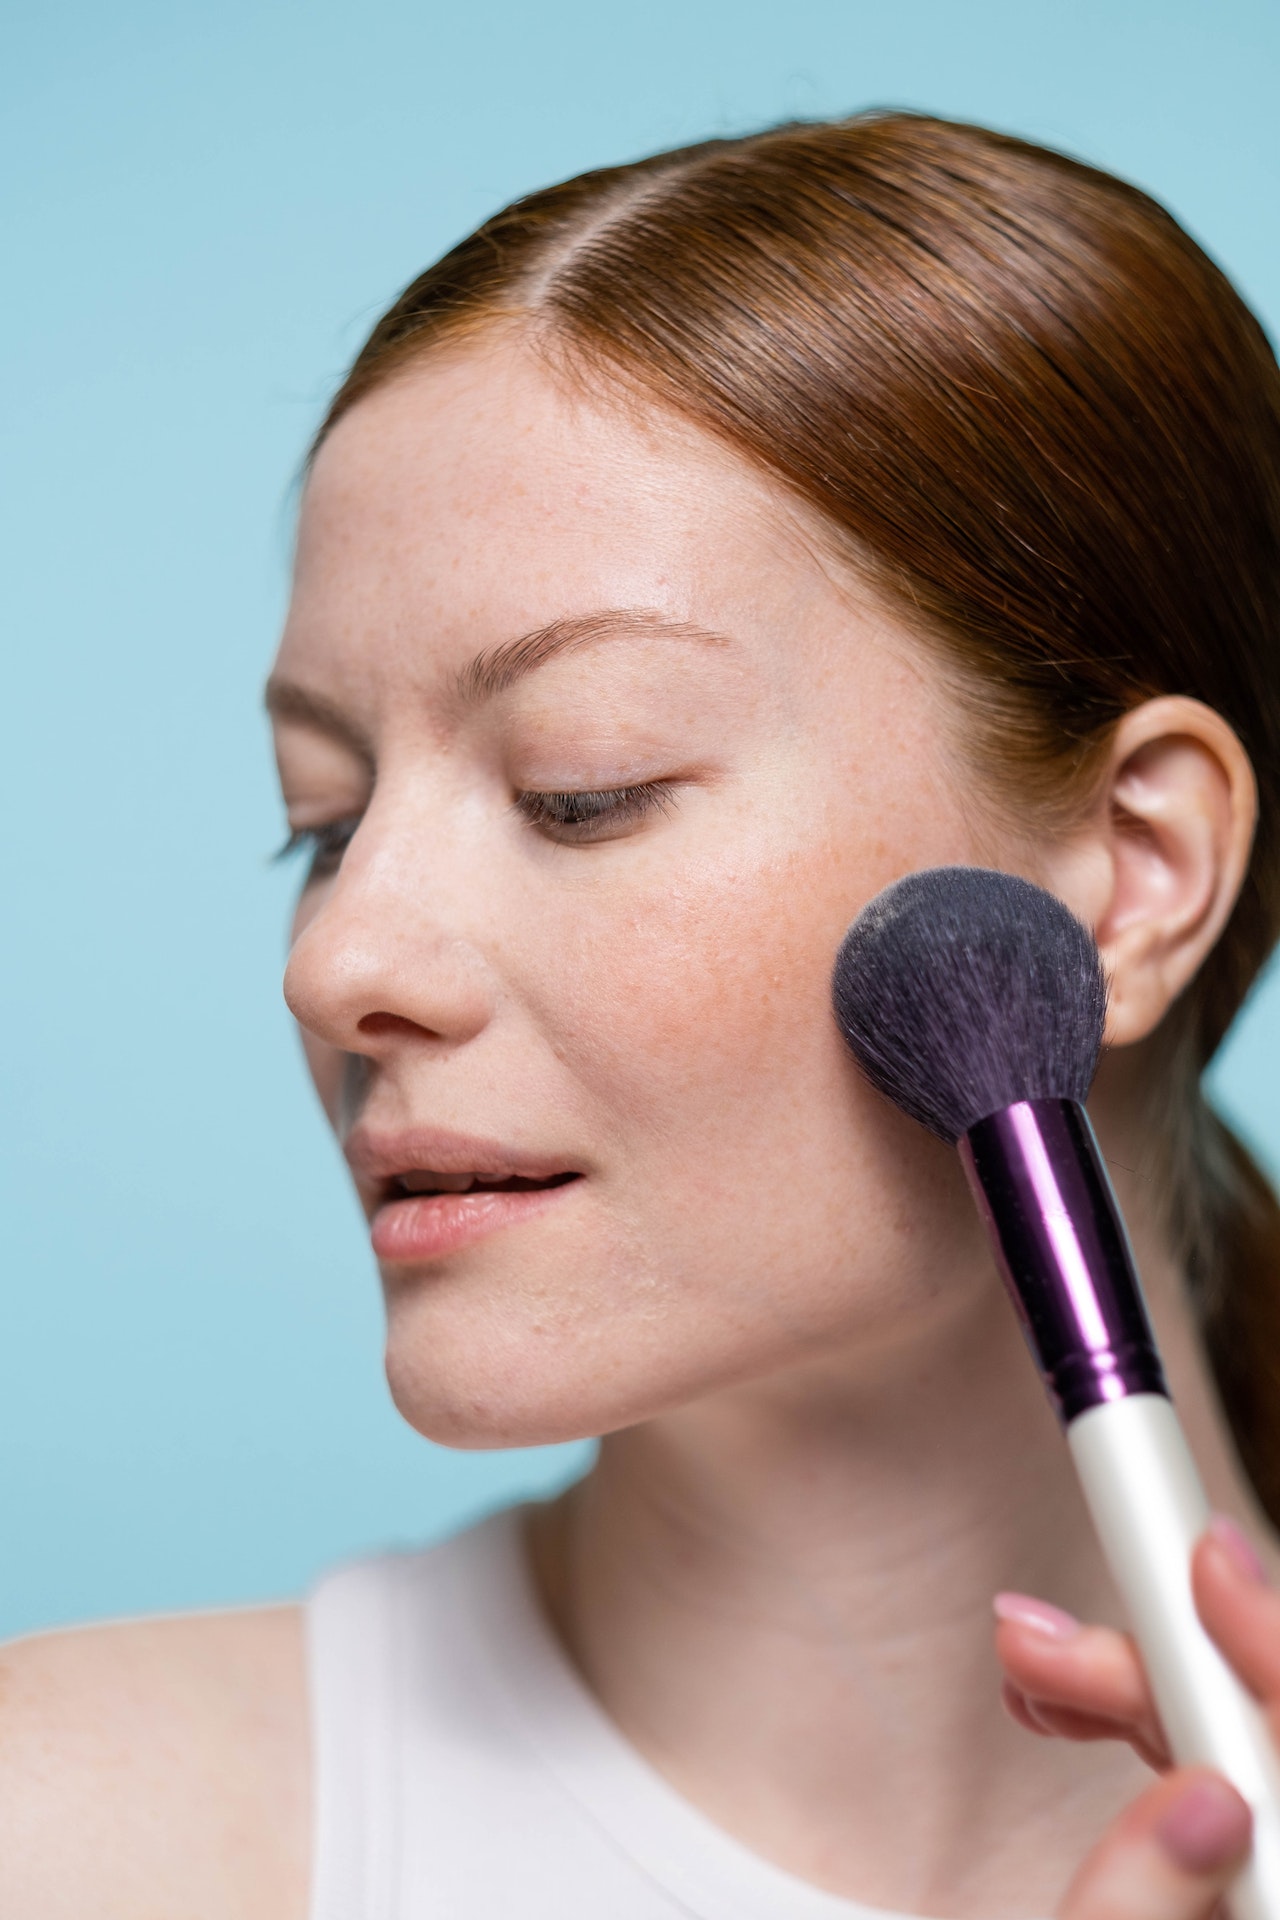 What Is Loose Powder & How To Correctly Use It?